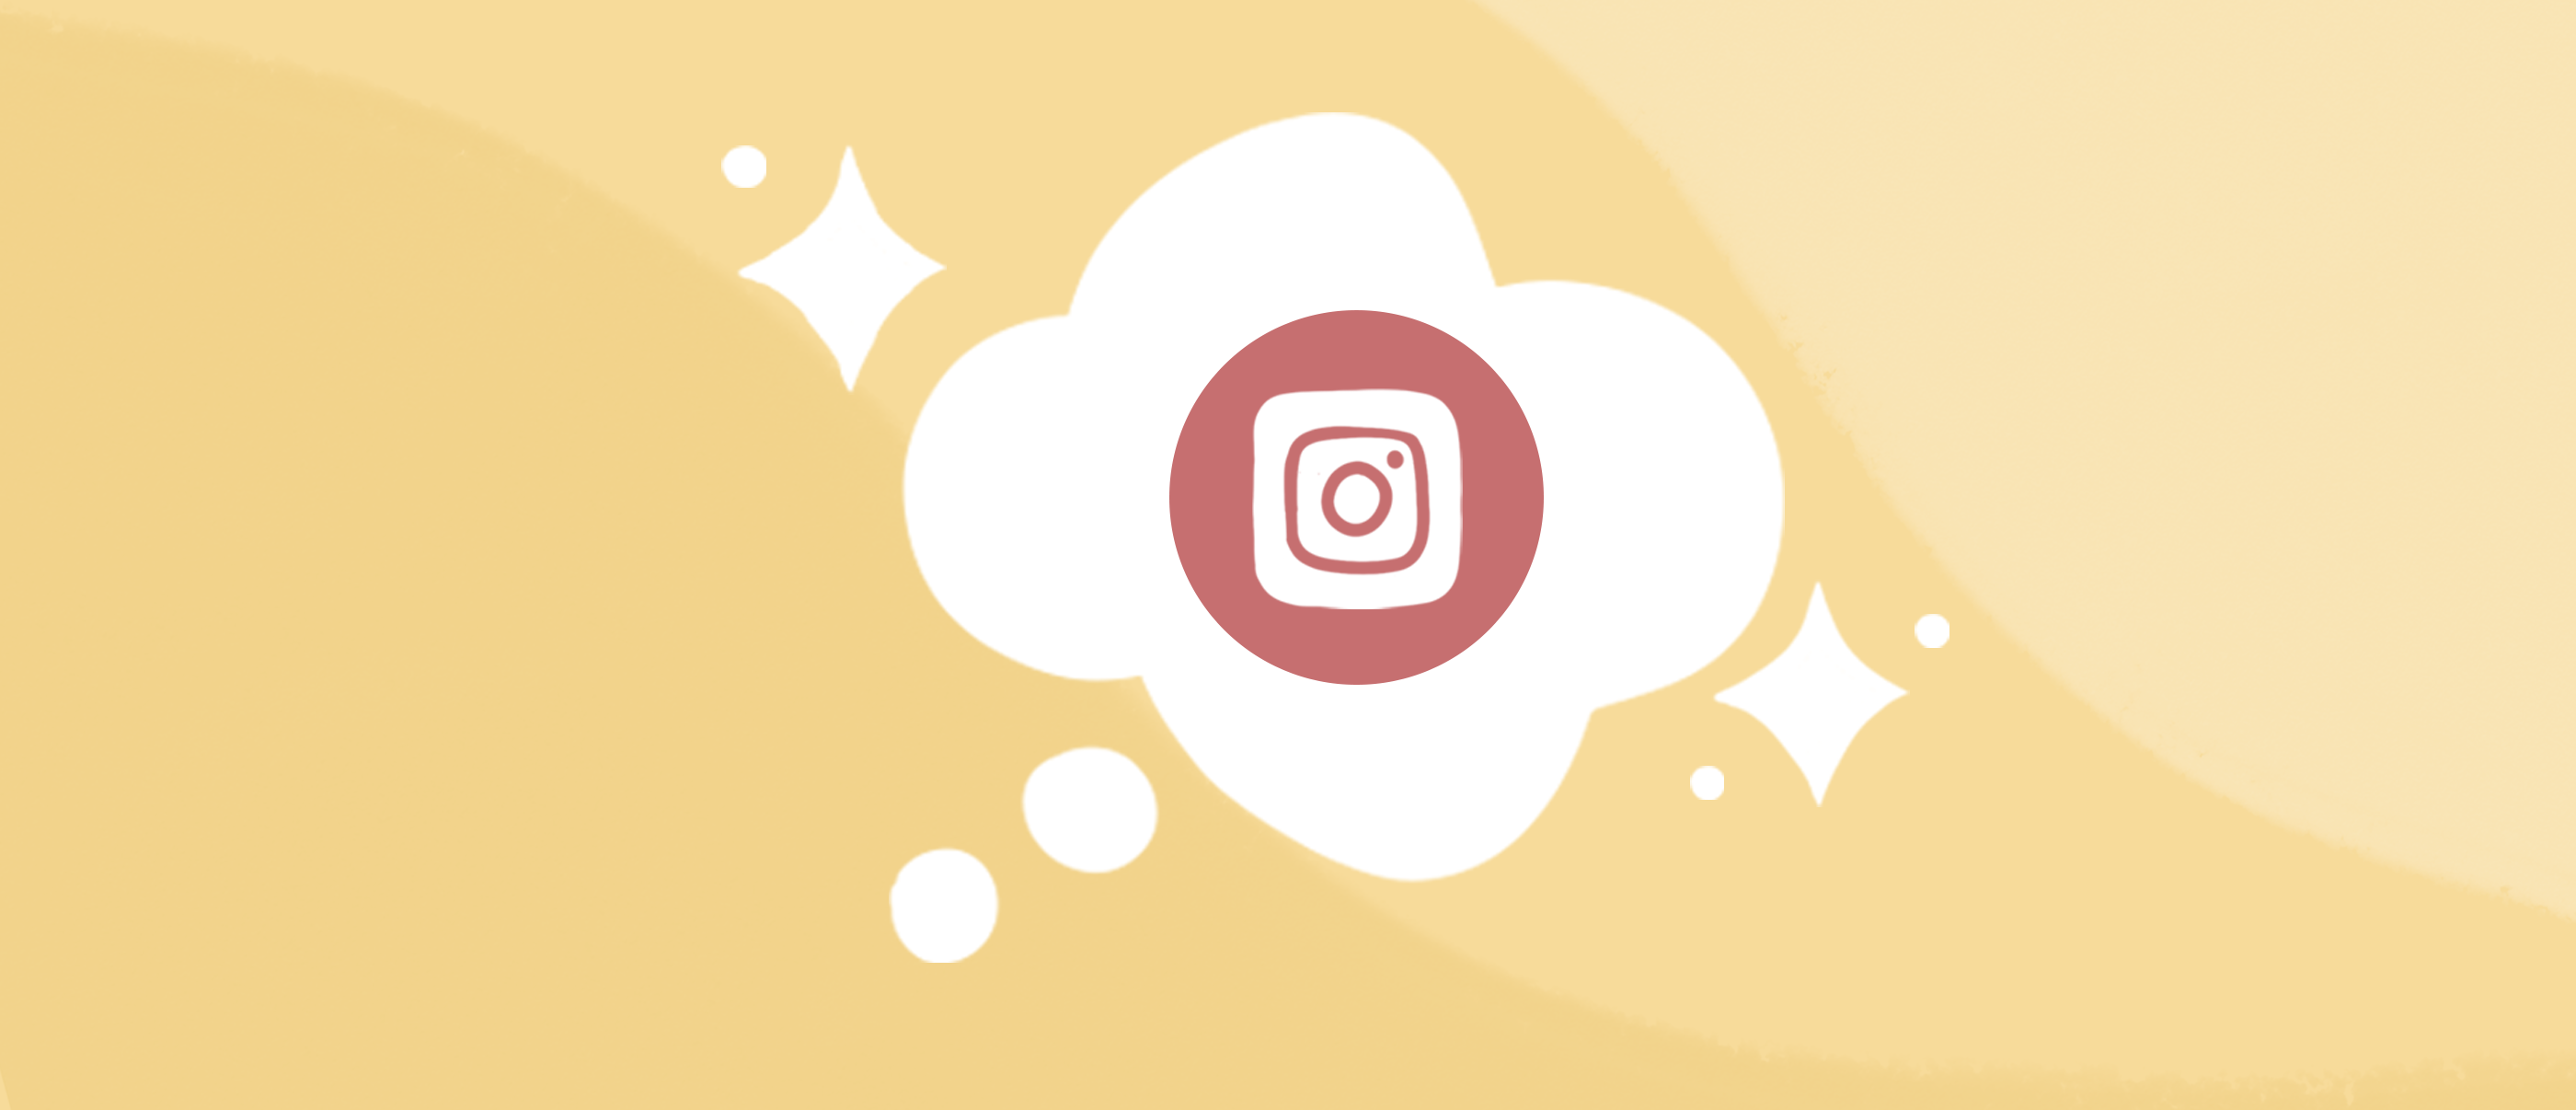 5 Instagram Tips and Best Practices for Designers in 2020